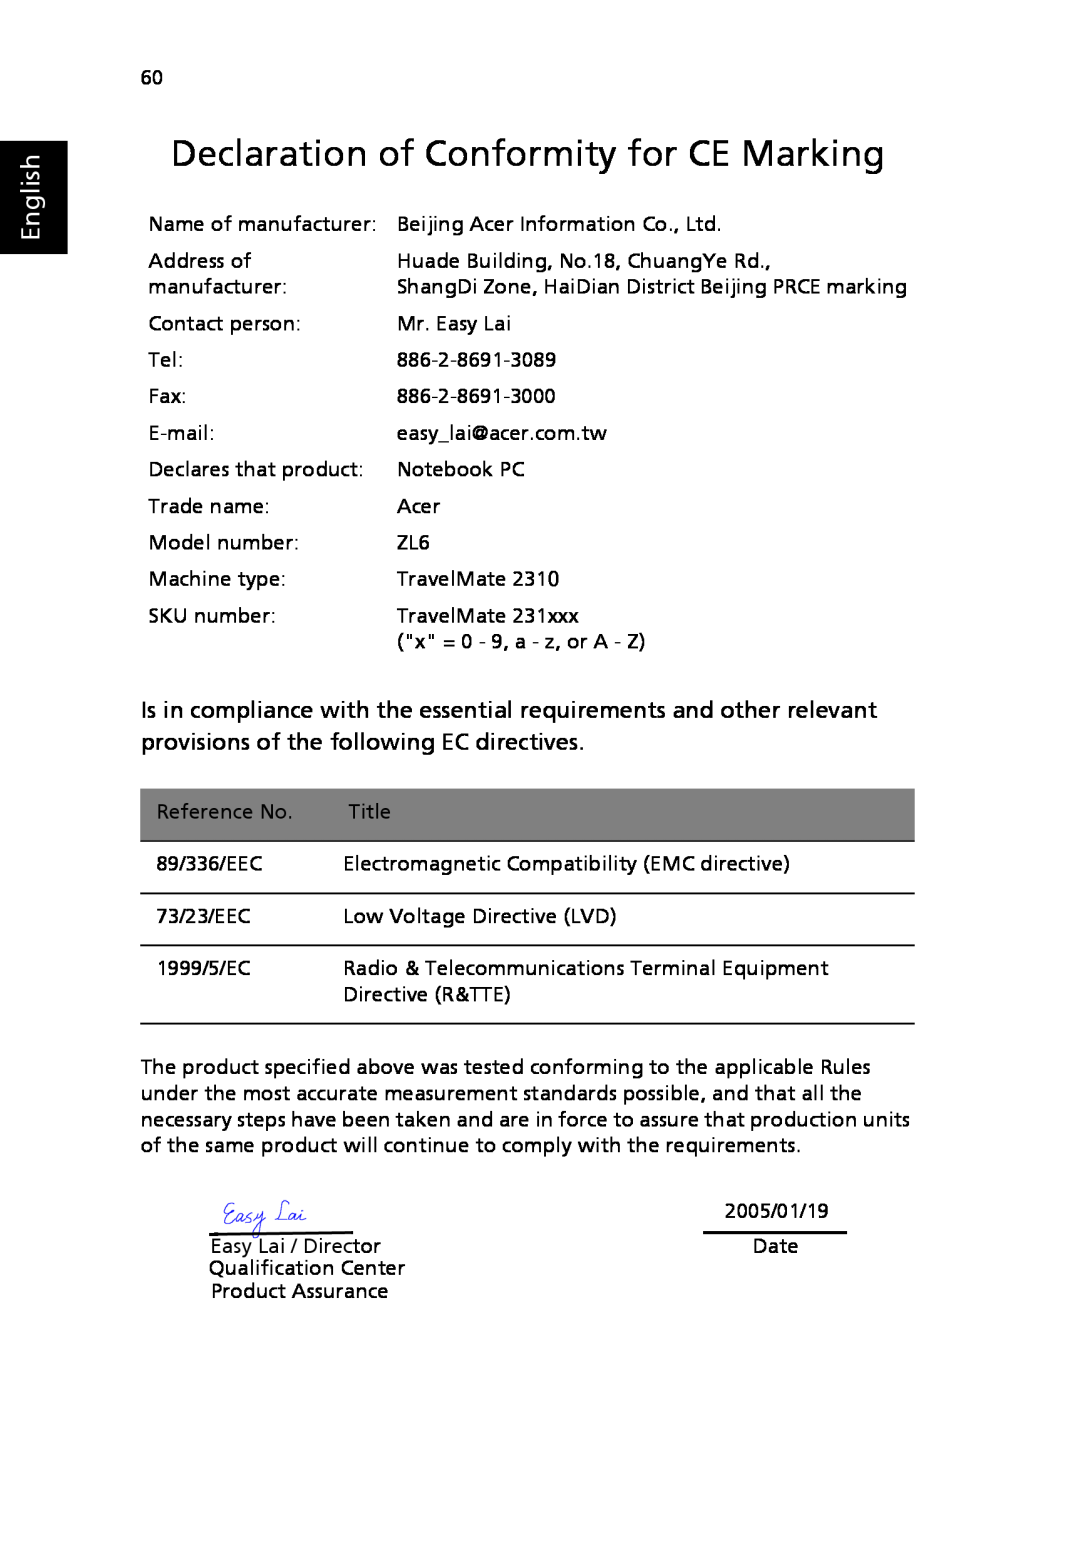 Acer 2310 Series manual Declaration of Conformity for CE Marking, English 